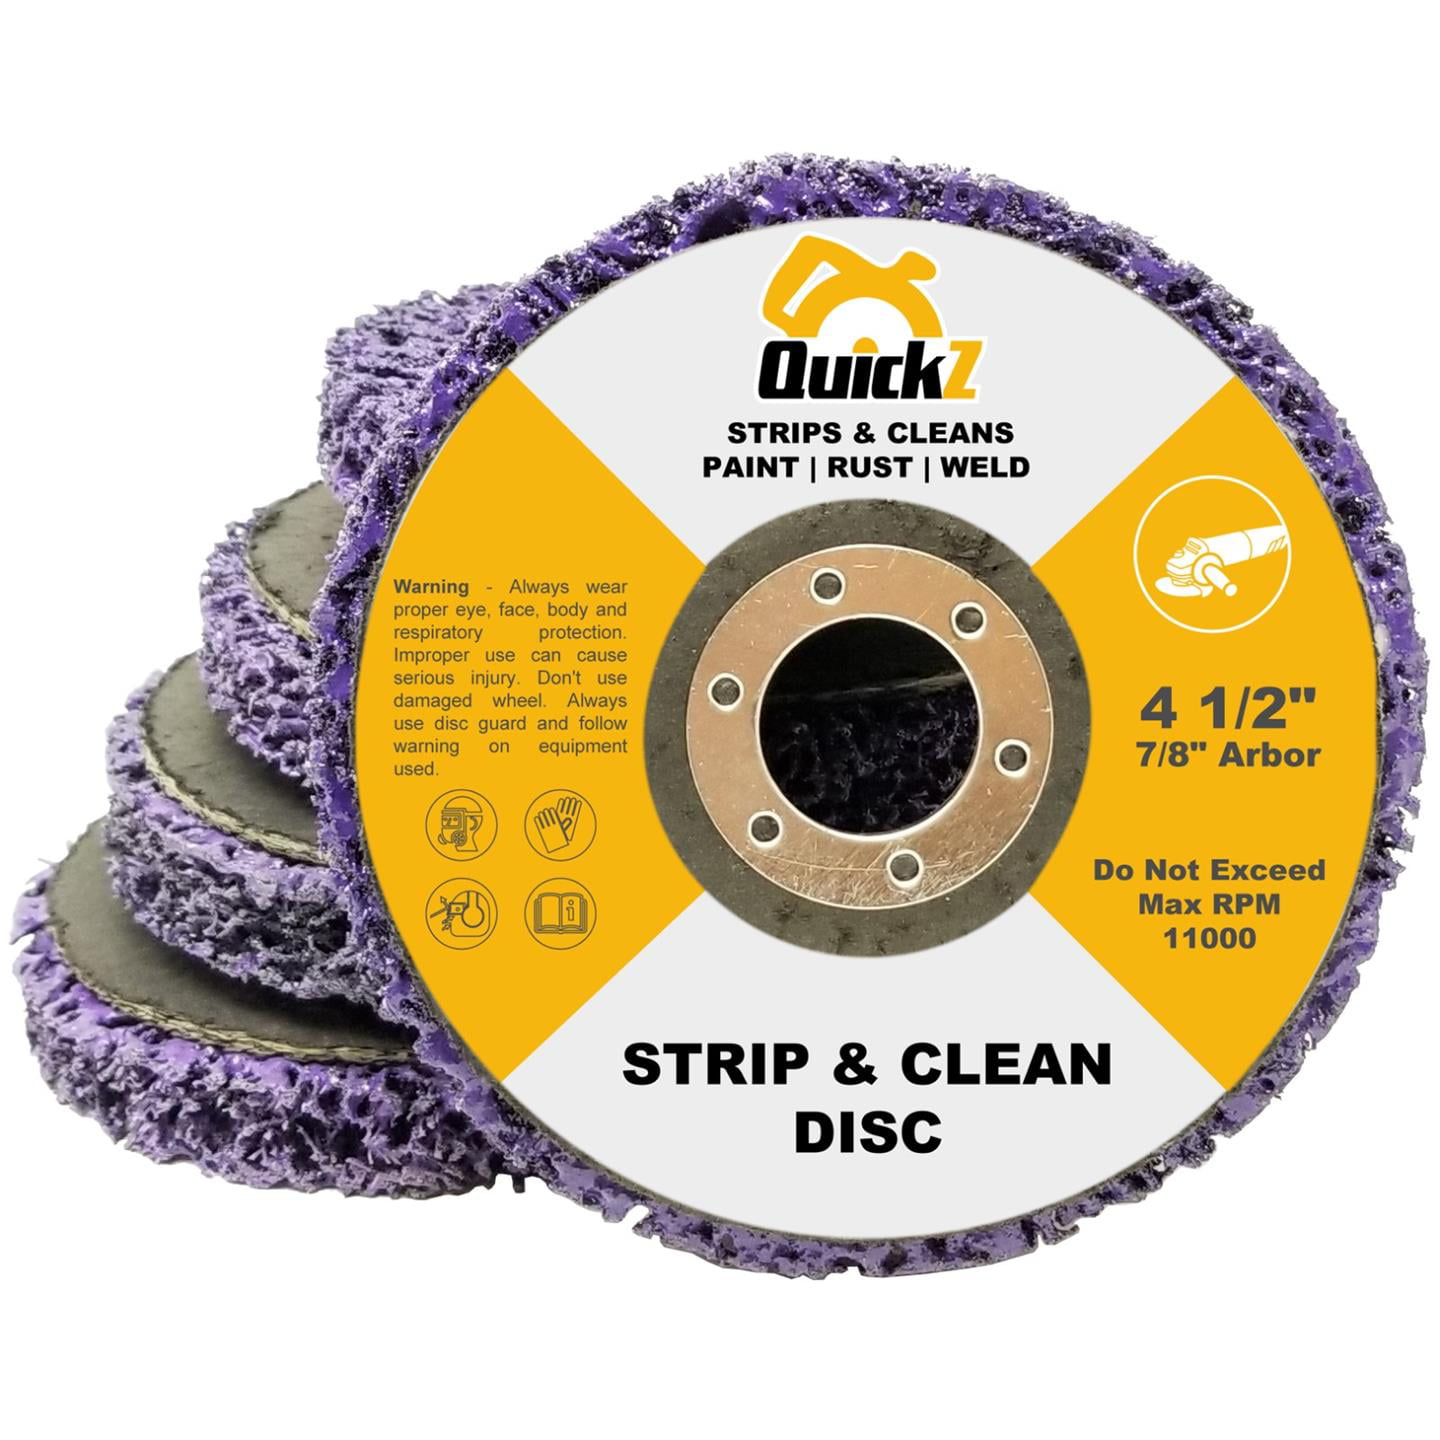 Stripper Discs Purple Rust Welds Quick Change Sanding Disc Keadic 16 Pcs 2 Inches Purple Strip Discs Stripping Wheel Oxidation Paint Remover Wheels for Angle Grinders Clean and Remove Paint